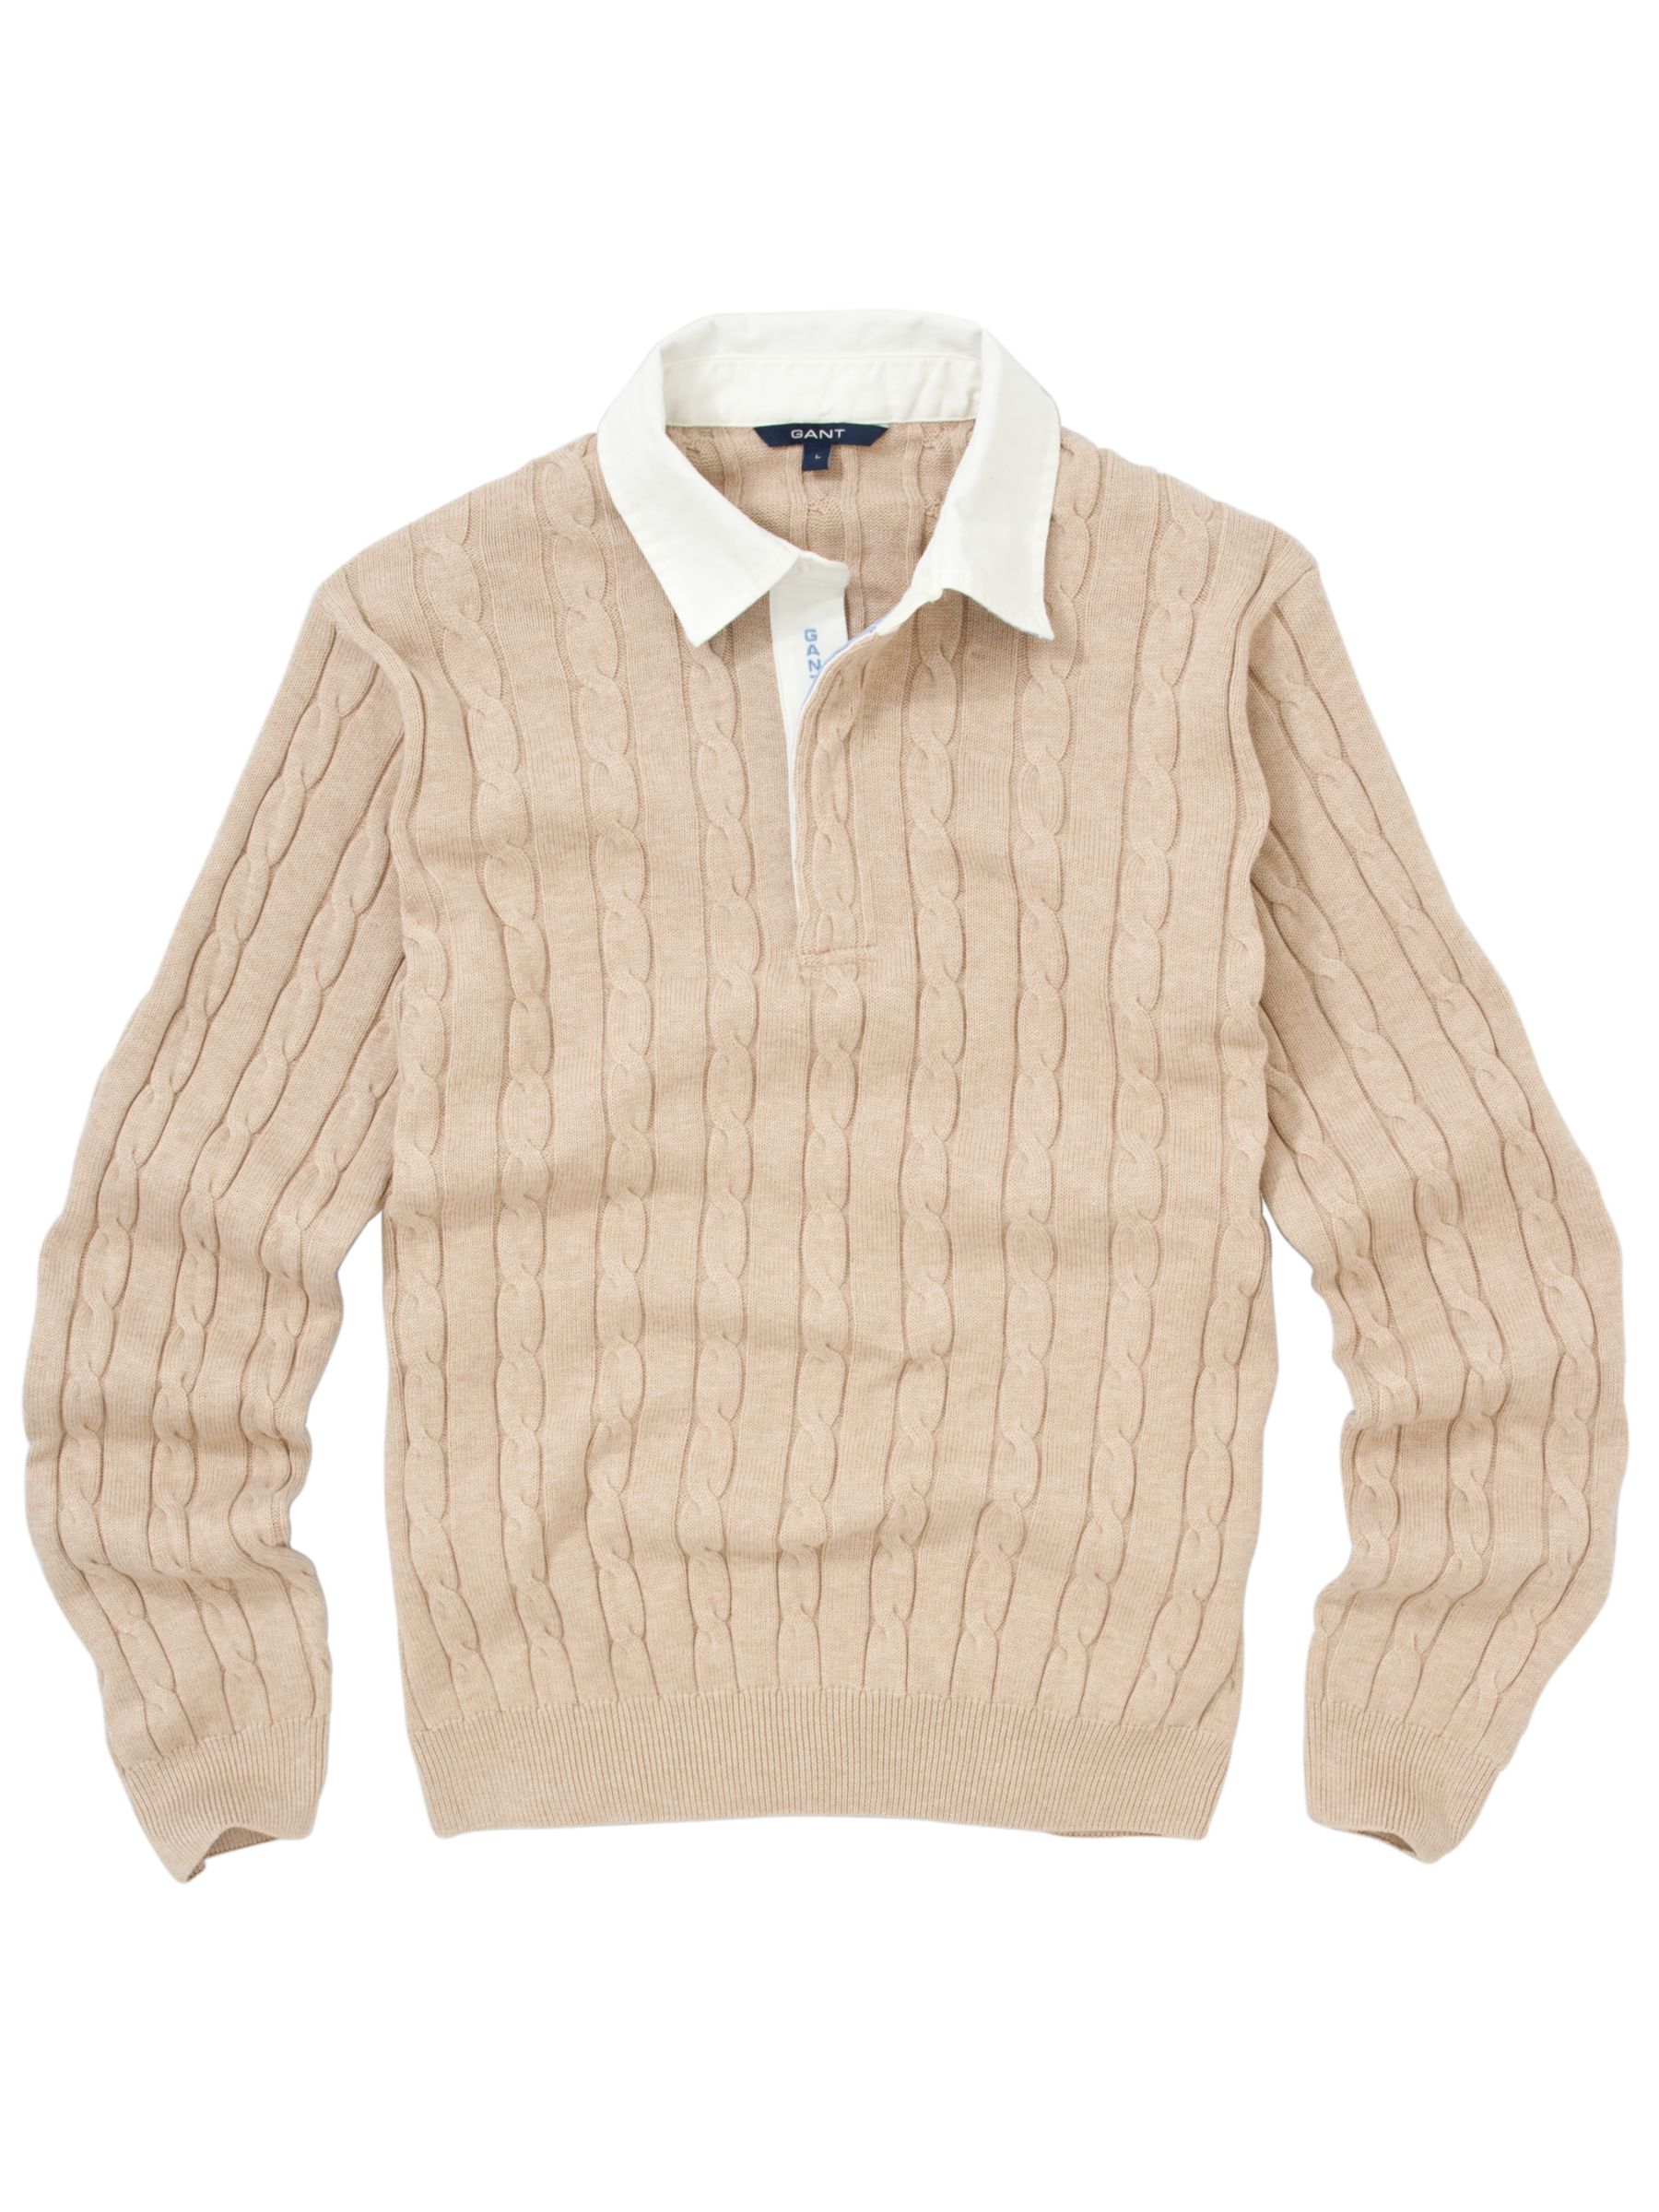 Gant Cable Knit Rugby Shirt, Neutrals